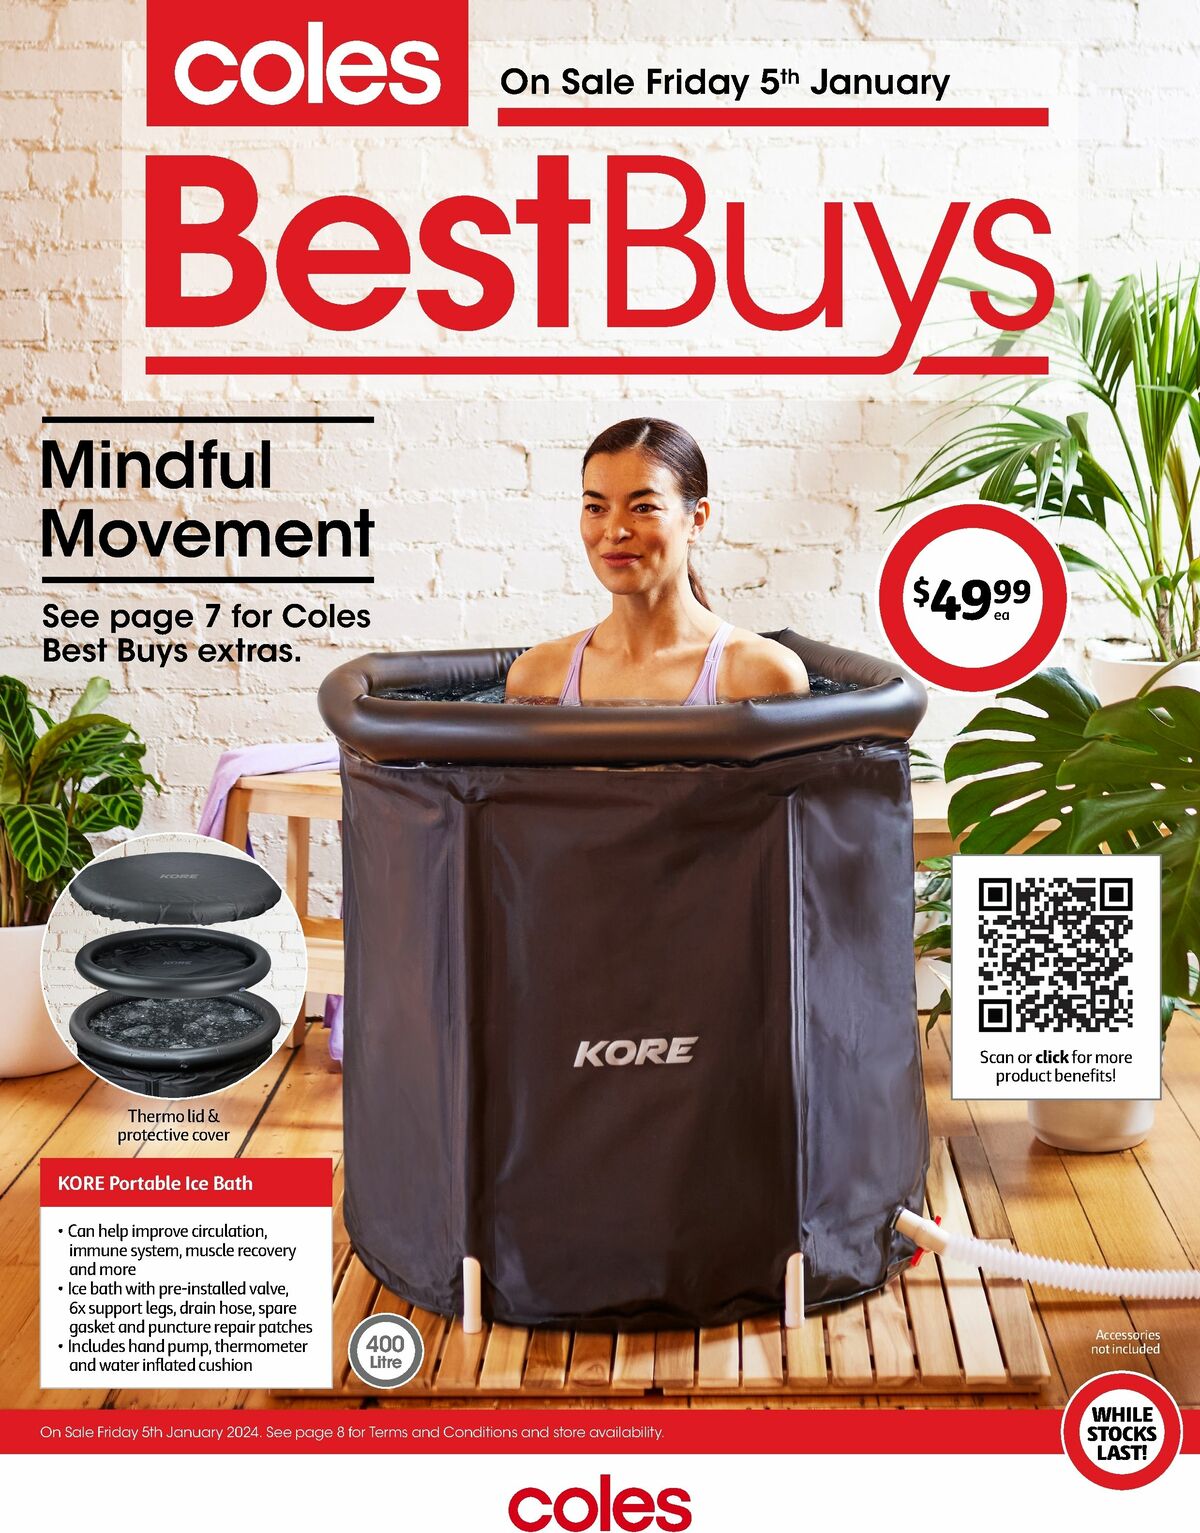 Coles Best Buys - Mindful Movement Catalogues from 5 January